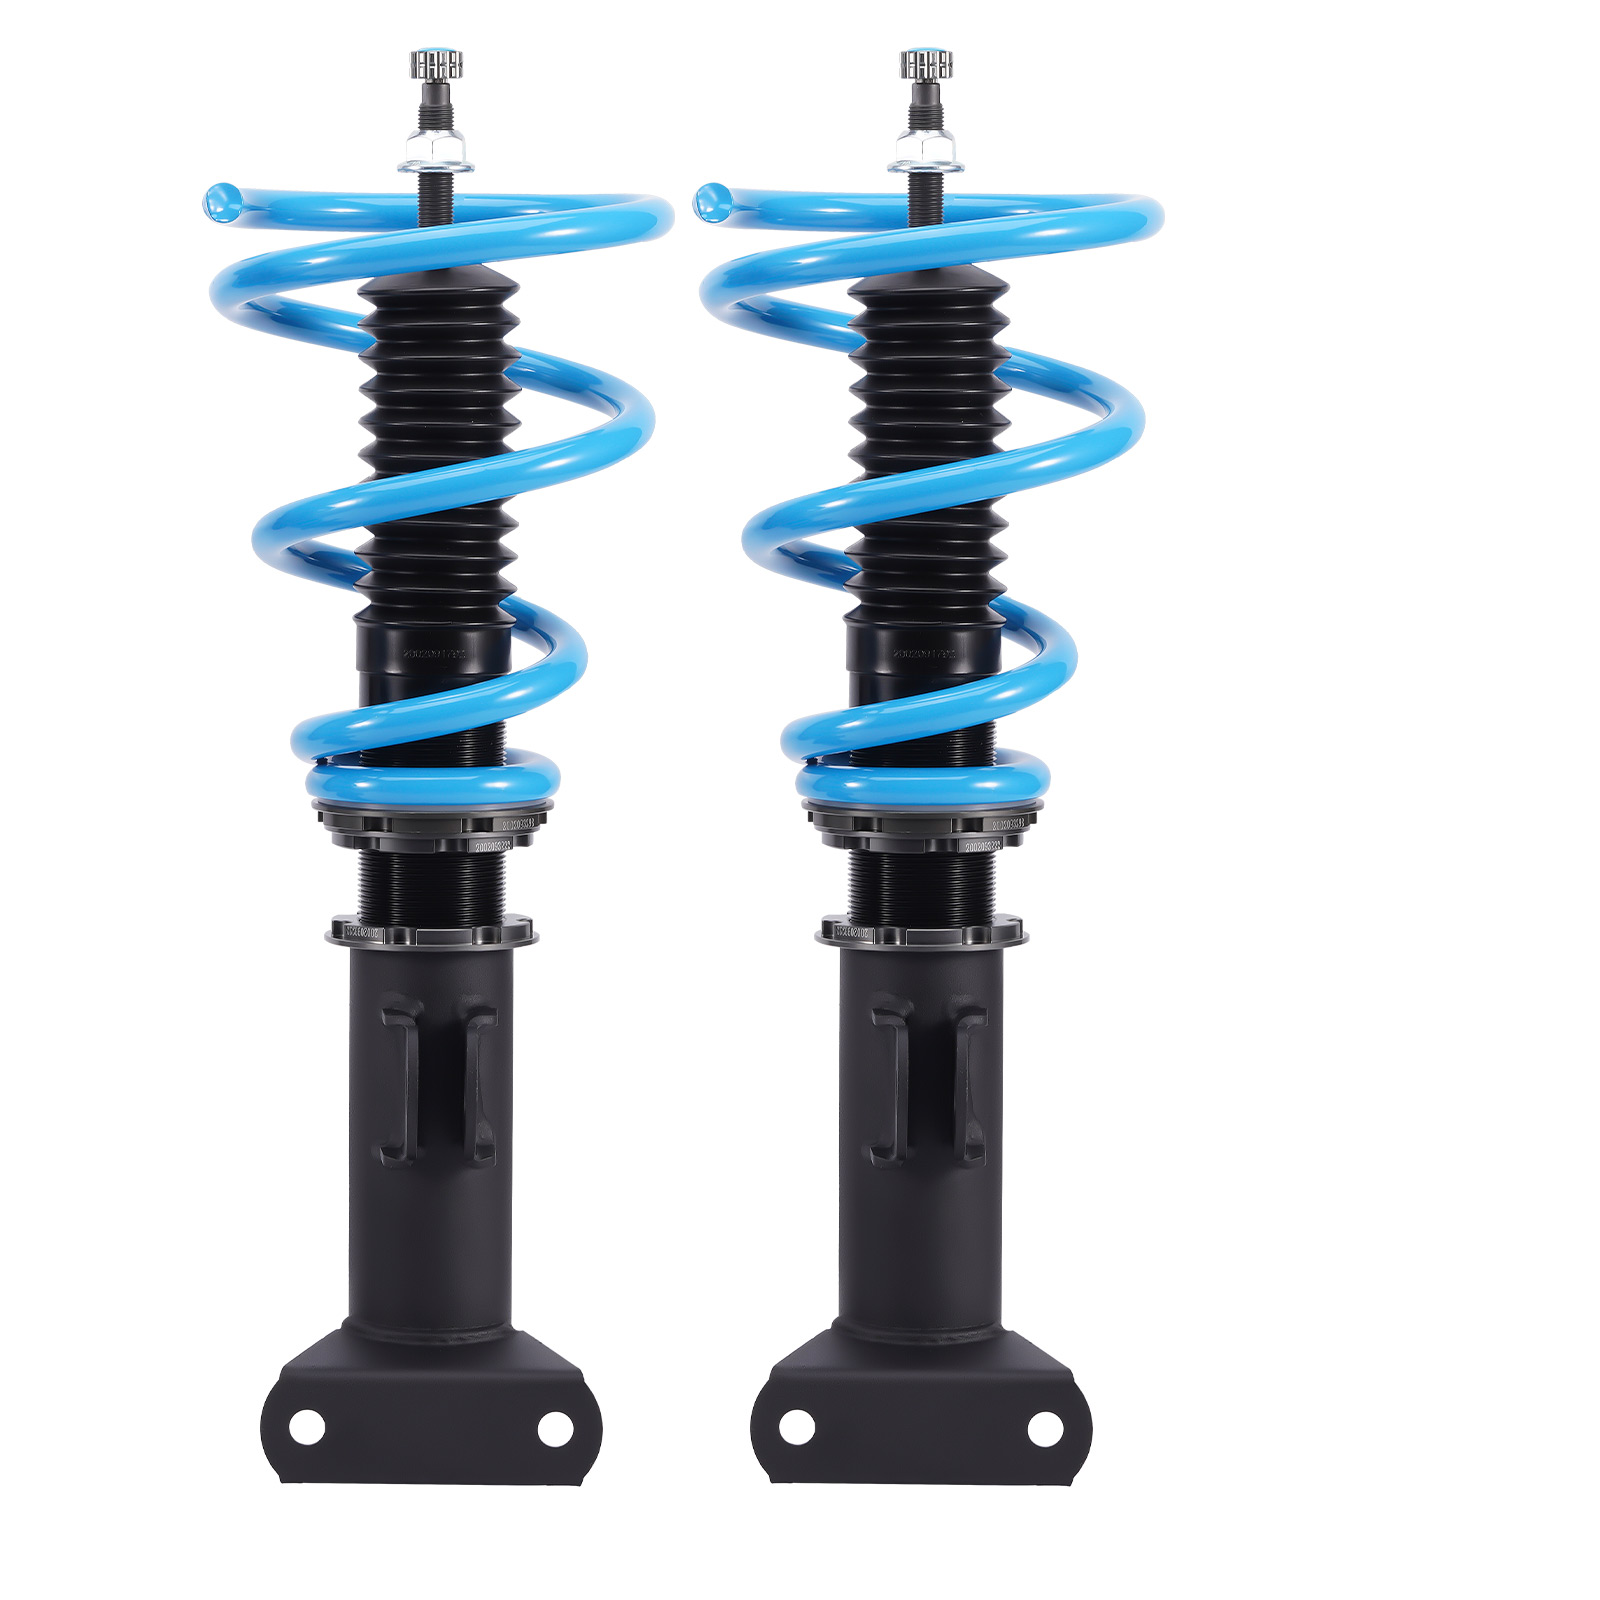 24 Way Damper Coilovers Suspension Kit for Mercedes Benz C-class W203 2000-2007